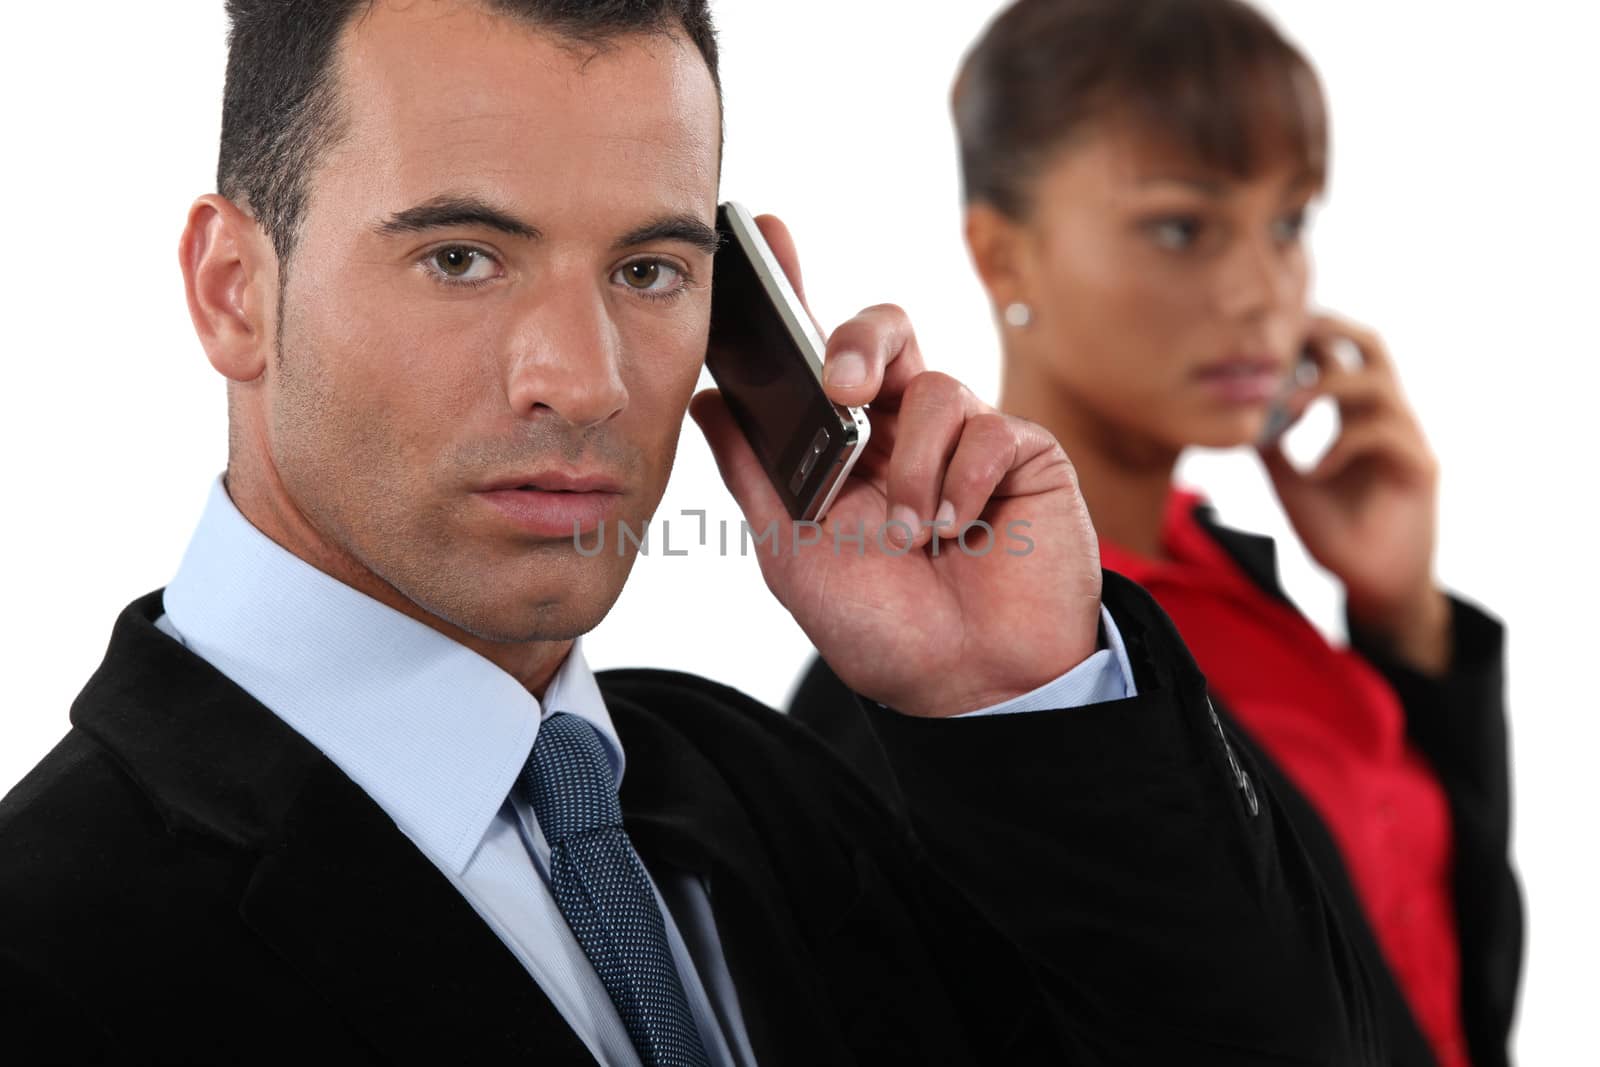 Business professionals talking on their mobile phones by phovoir